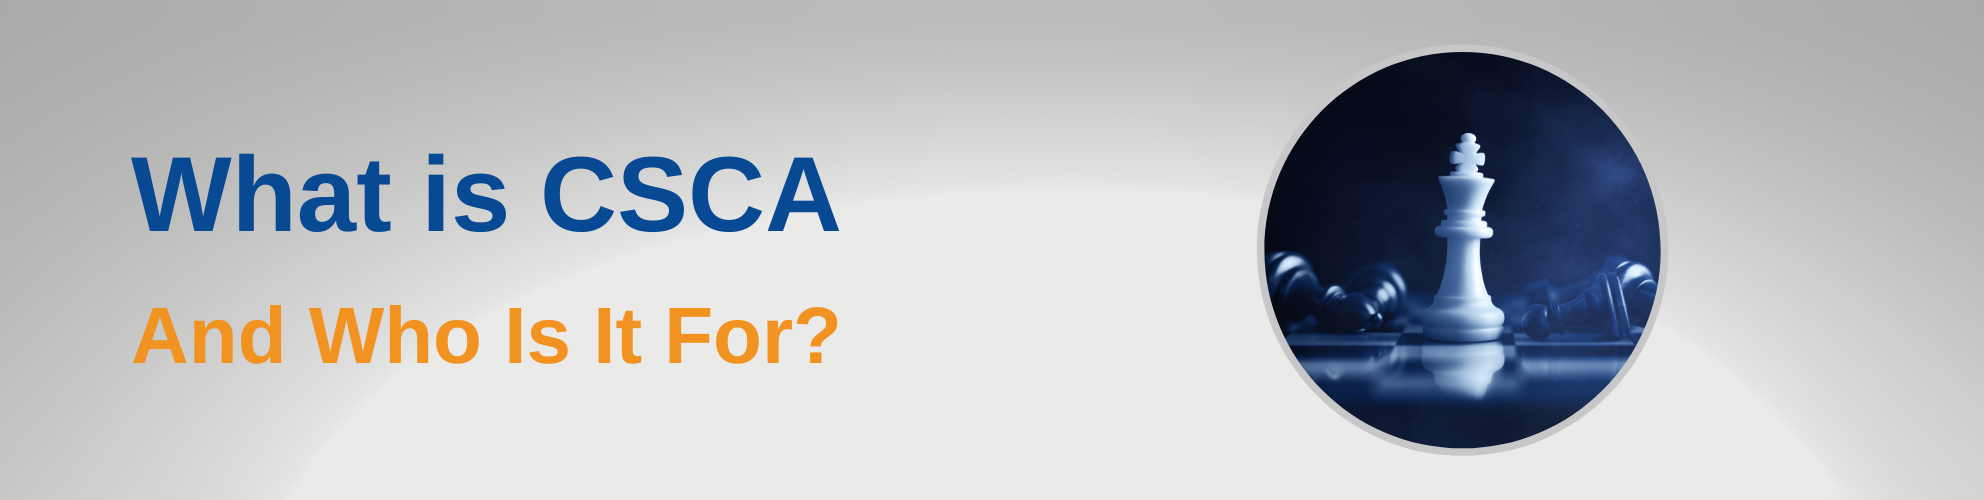 What Is CSCA - website banner